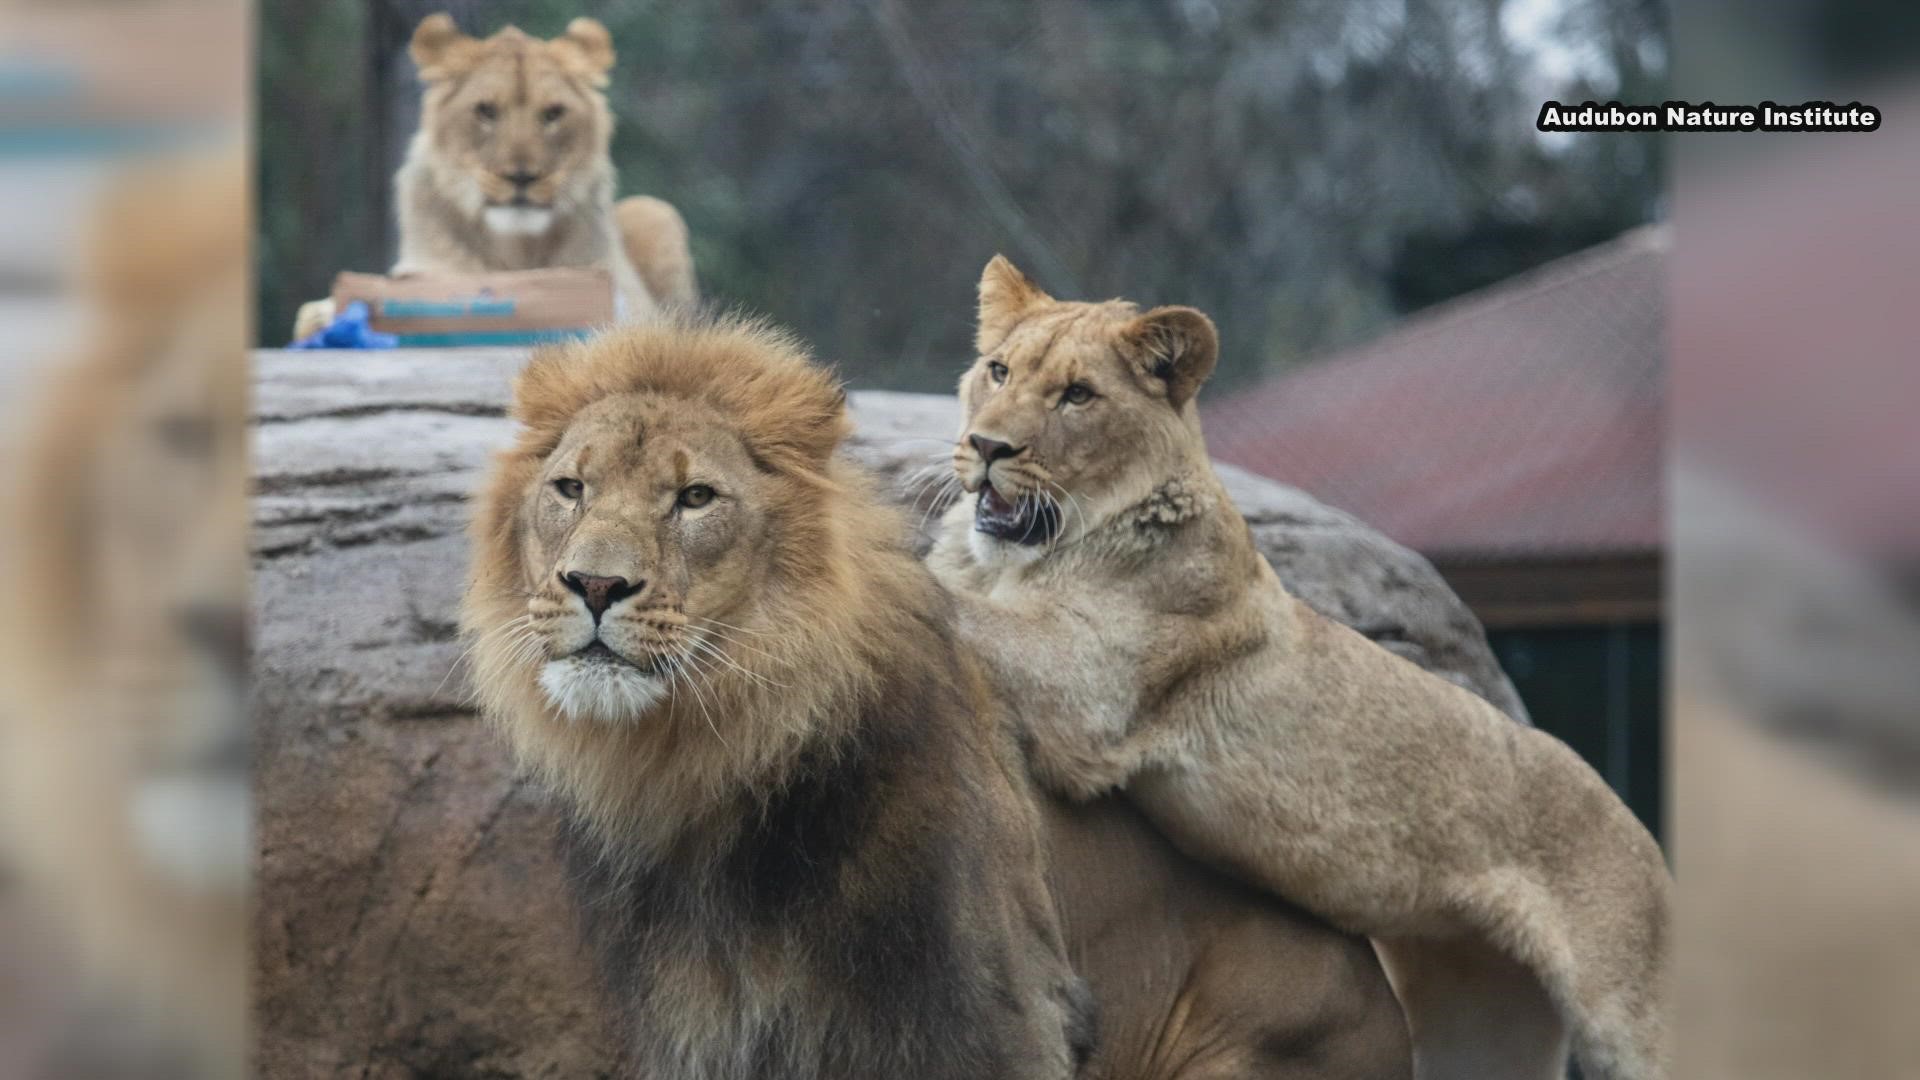 The Audubon Zoo announced that three of their lions have contracted the coronavirus it is unknown how they got it but the zoo is watching them.